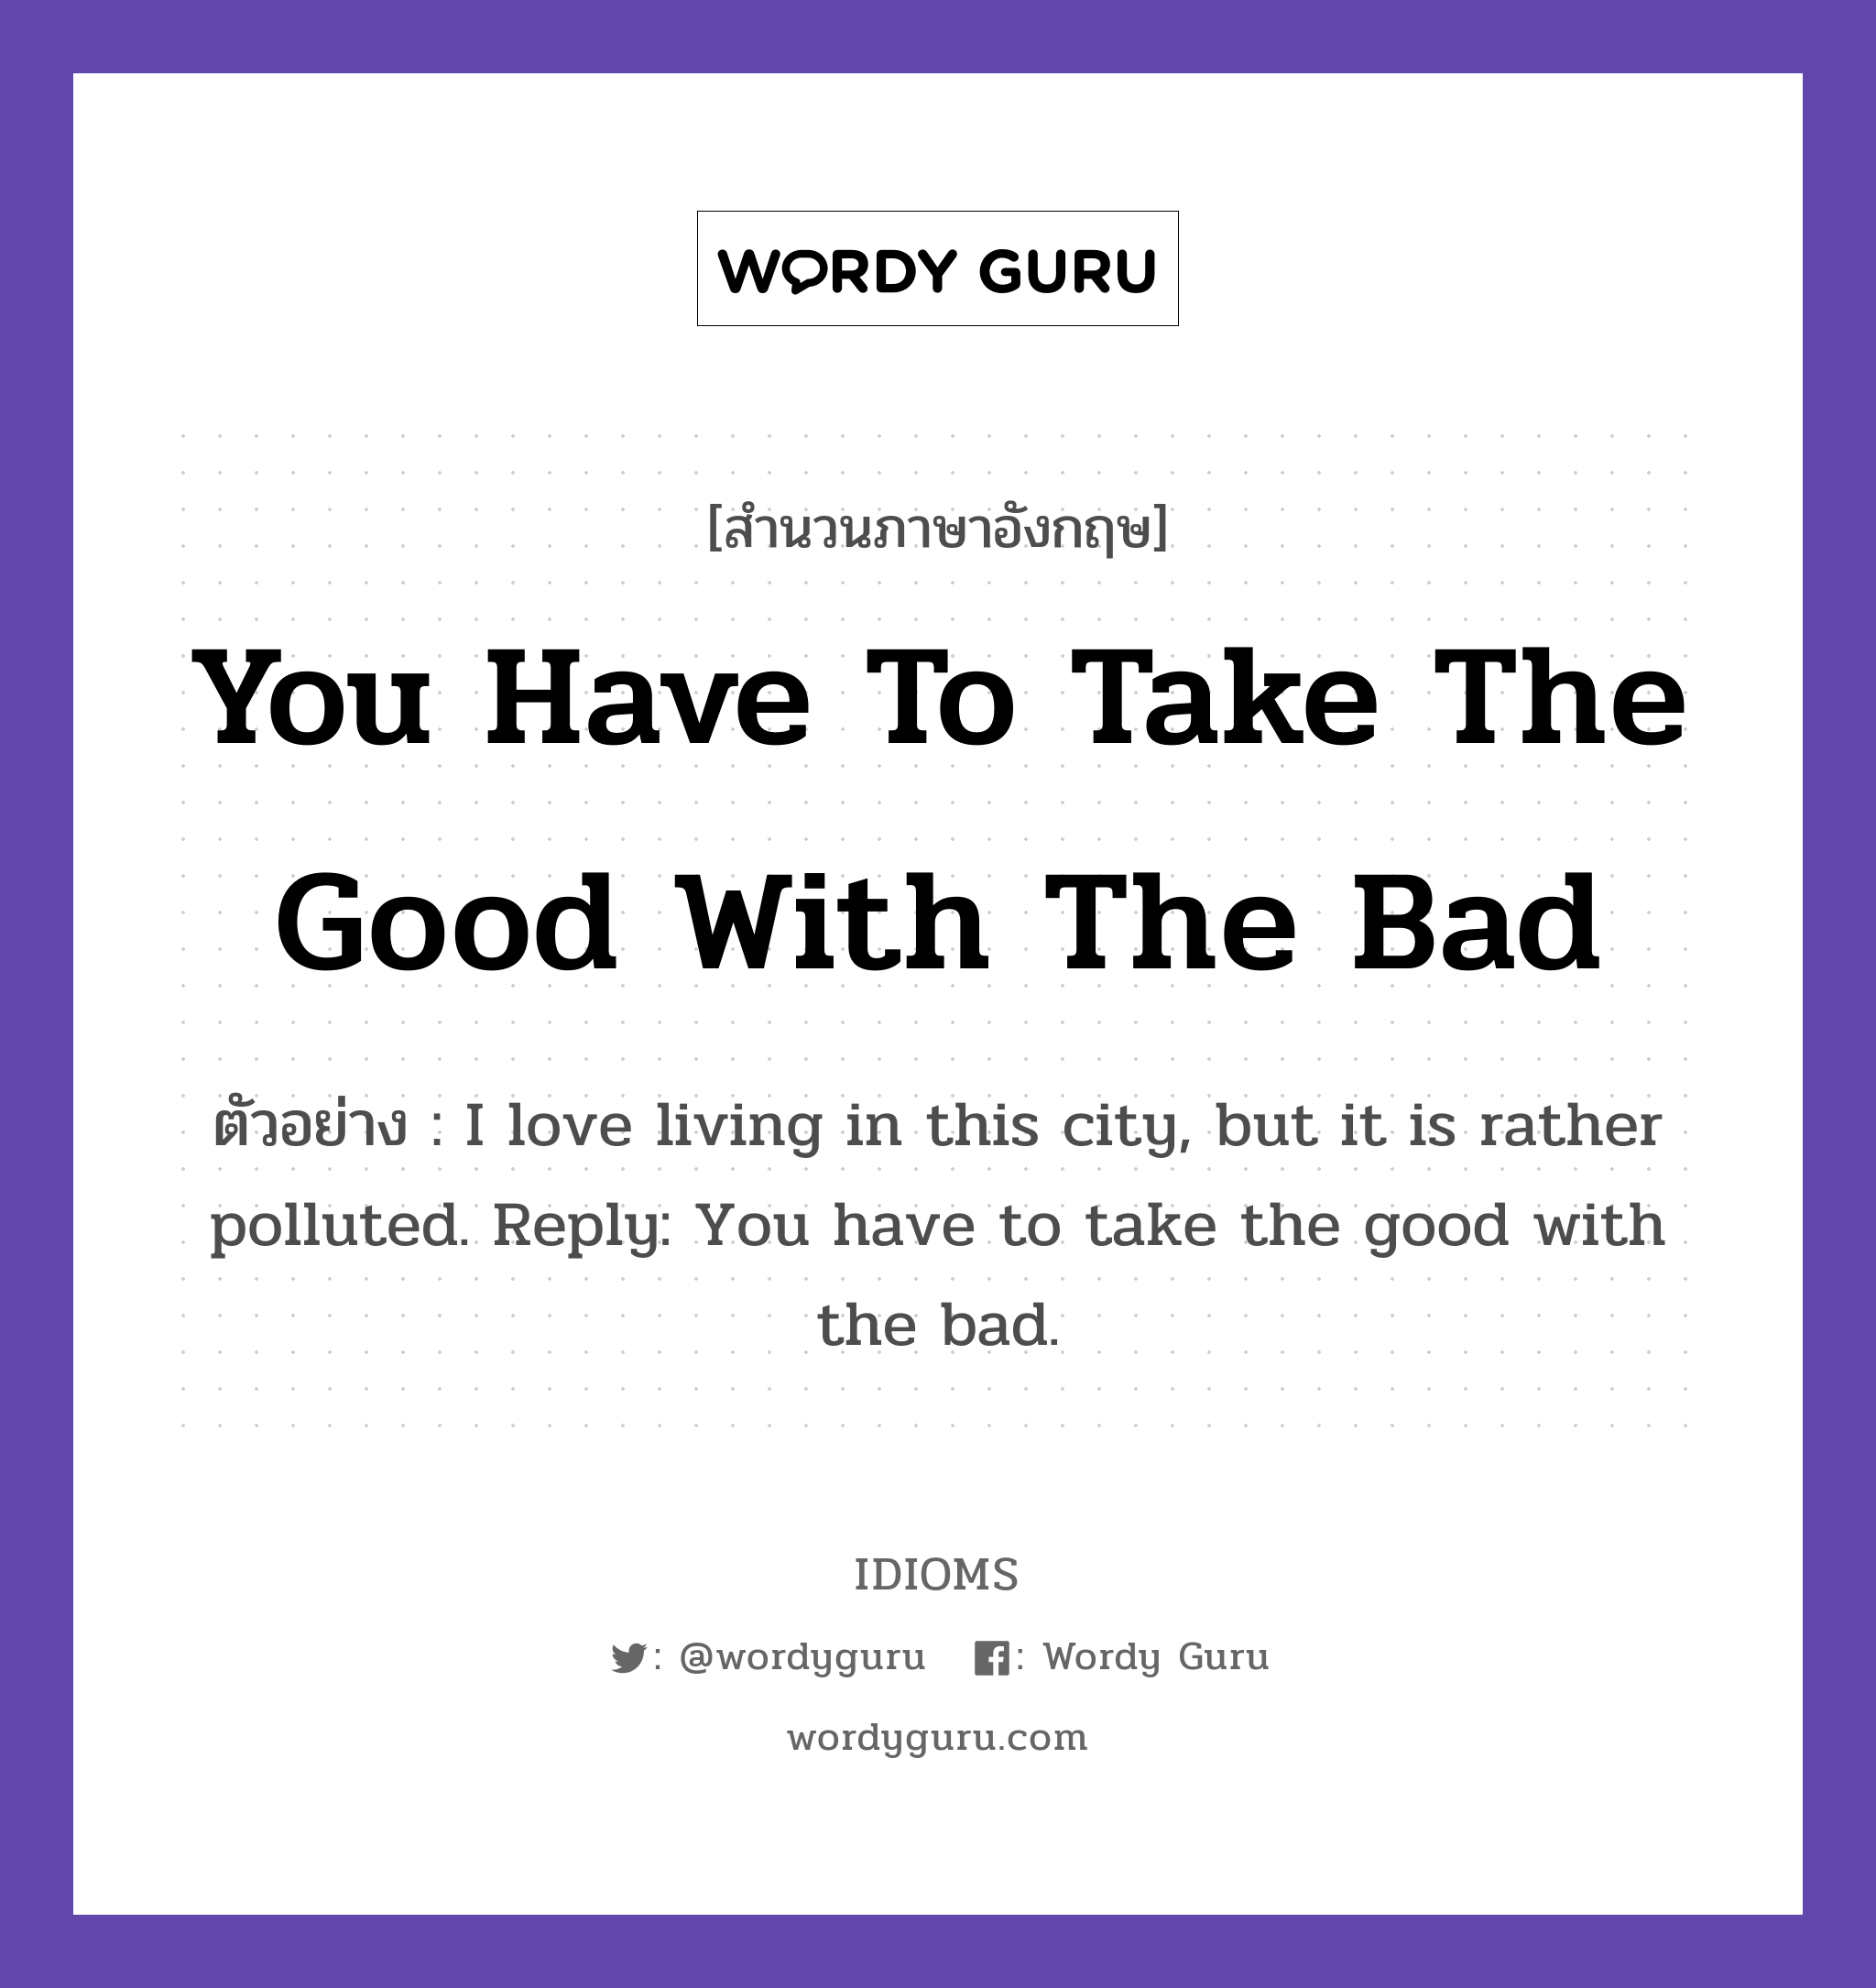 You Have To Take The Good With The Bad แปลว่า?, สำนวนภาษาอังกฤษ You Have To Take The Good With The Bad ตัวอย่าง I love living in this city, but it is rather polluted. Reply: You have to take the good with the bad.